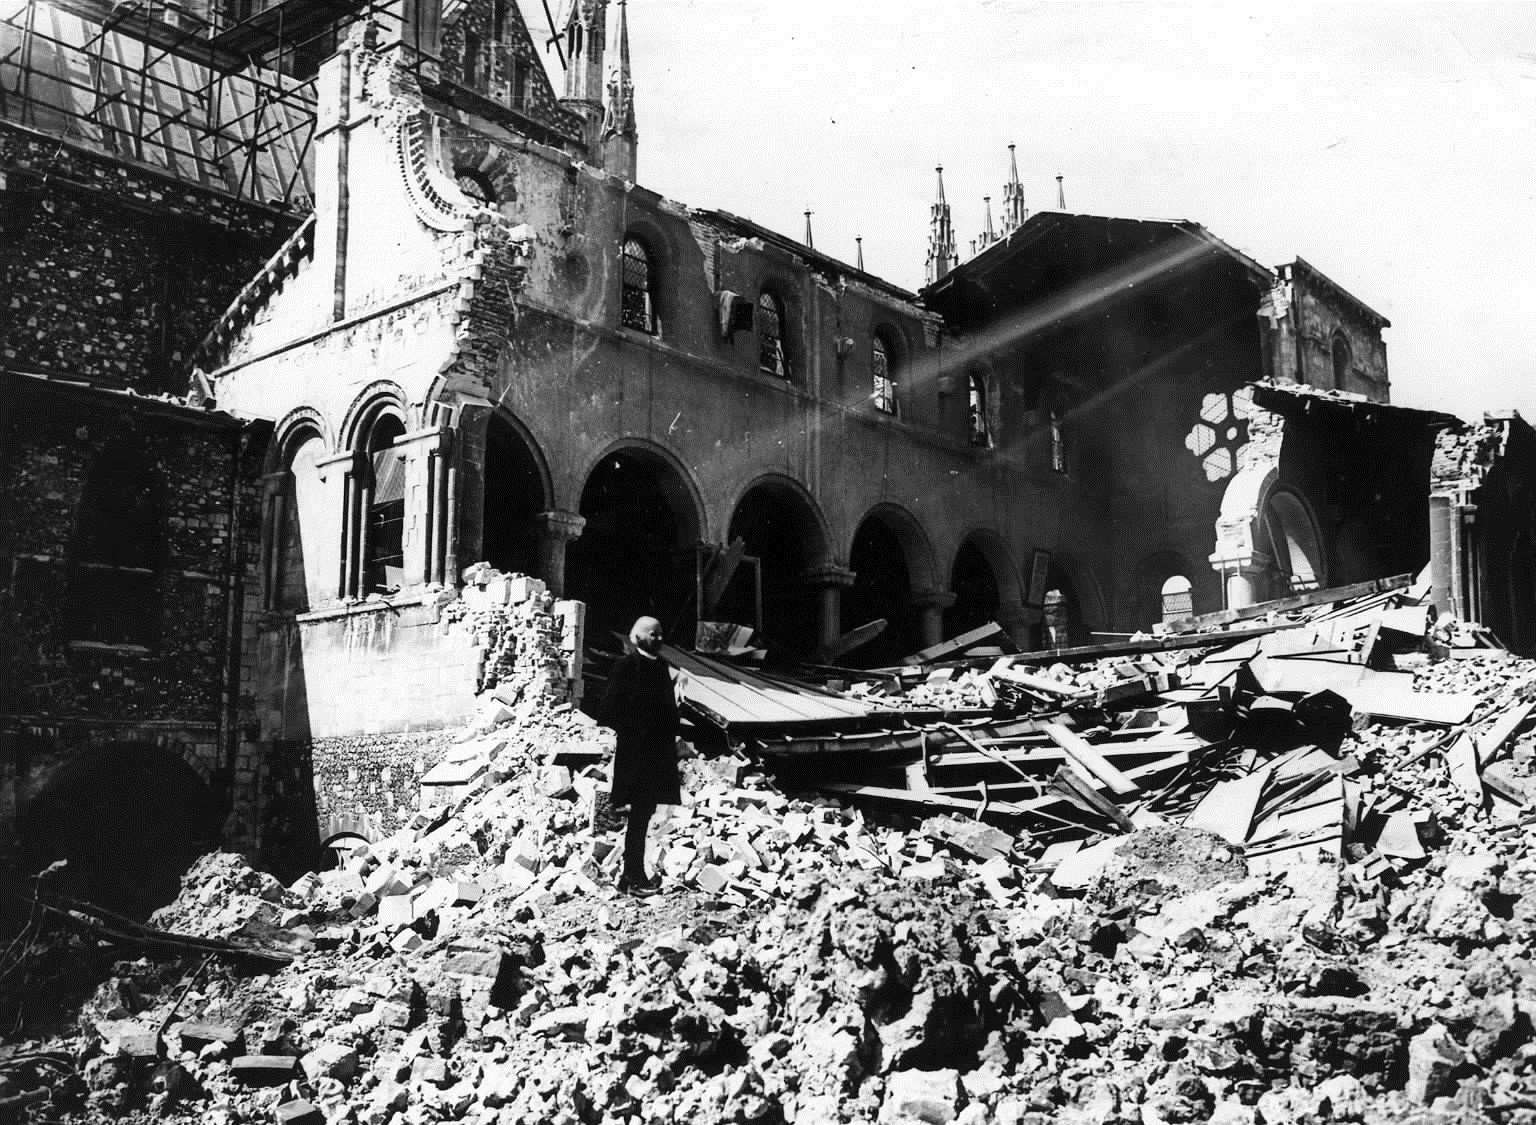 The Dean of Canterbury, Dr Hewlett Johnson, surveys the ruins of the bombed Cathedral